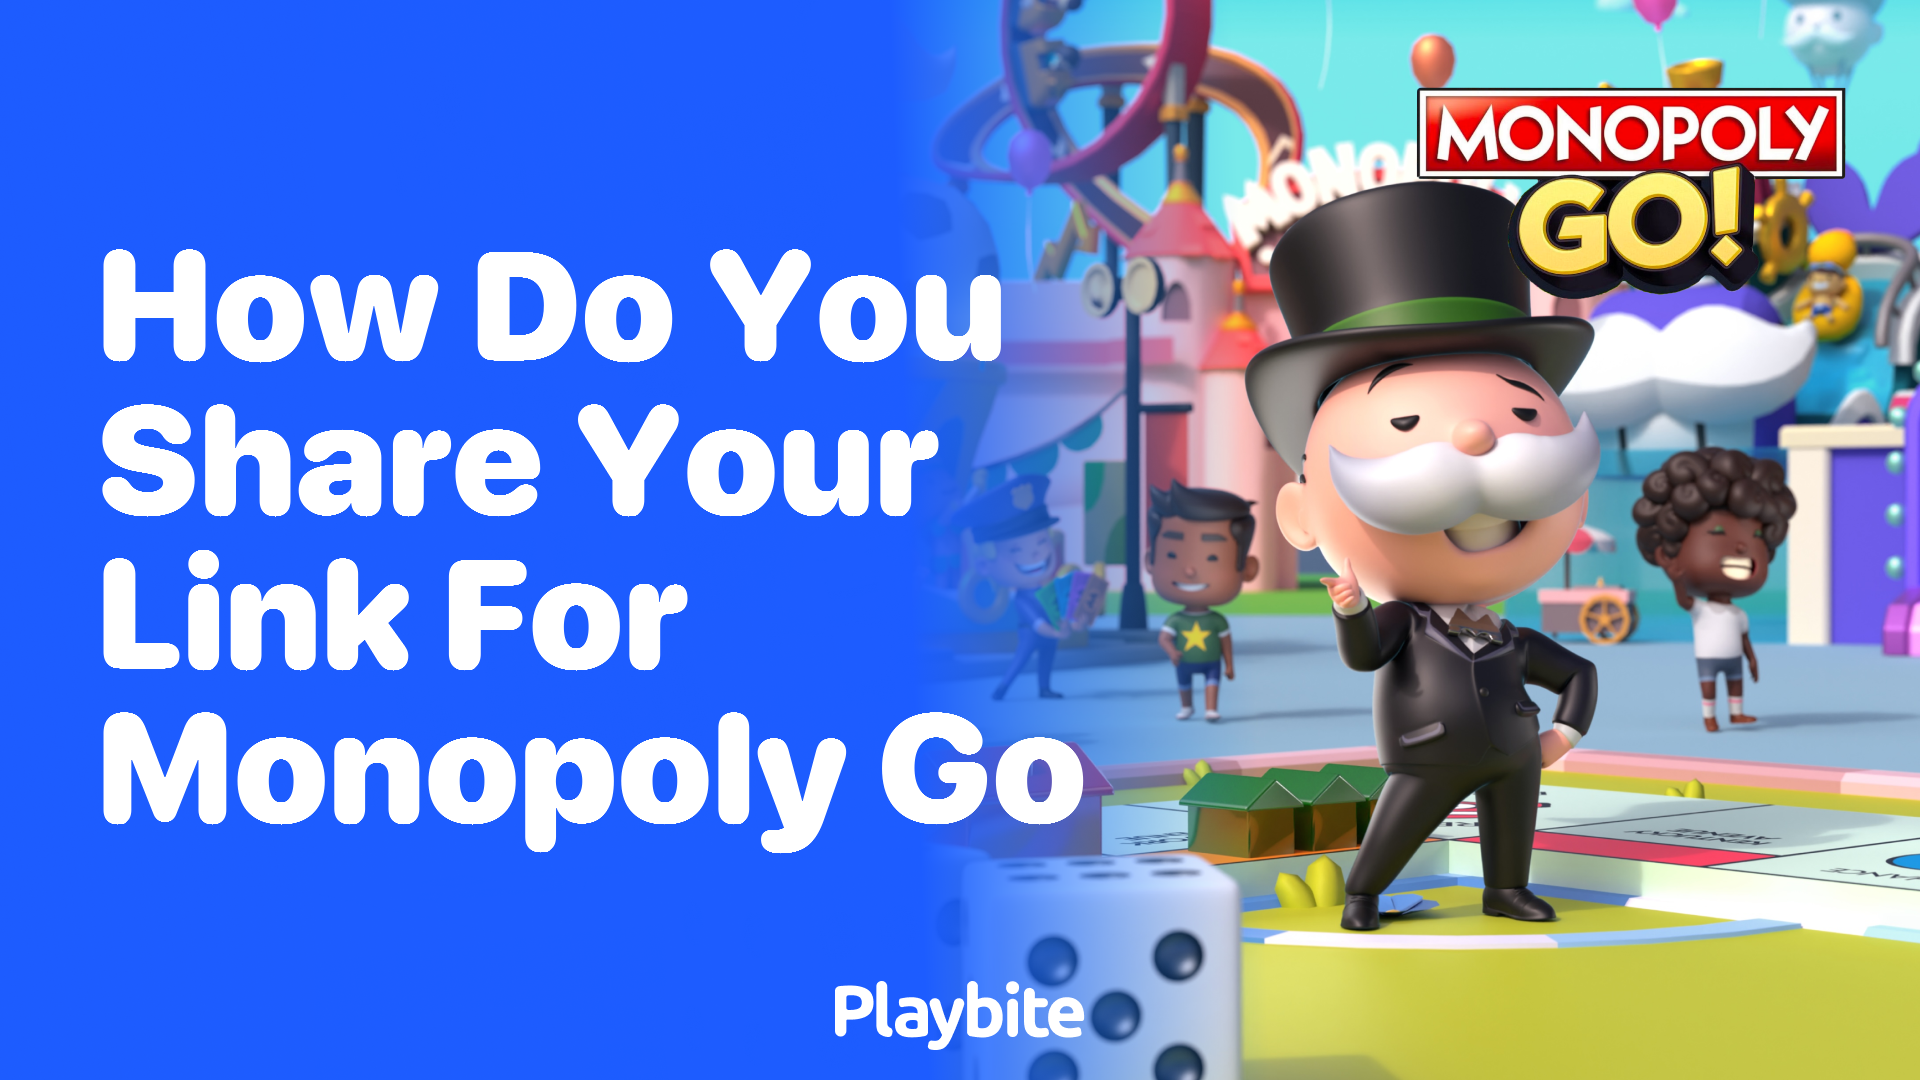 How Do You Share Your Link for Monopoly Go?